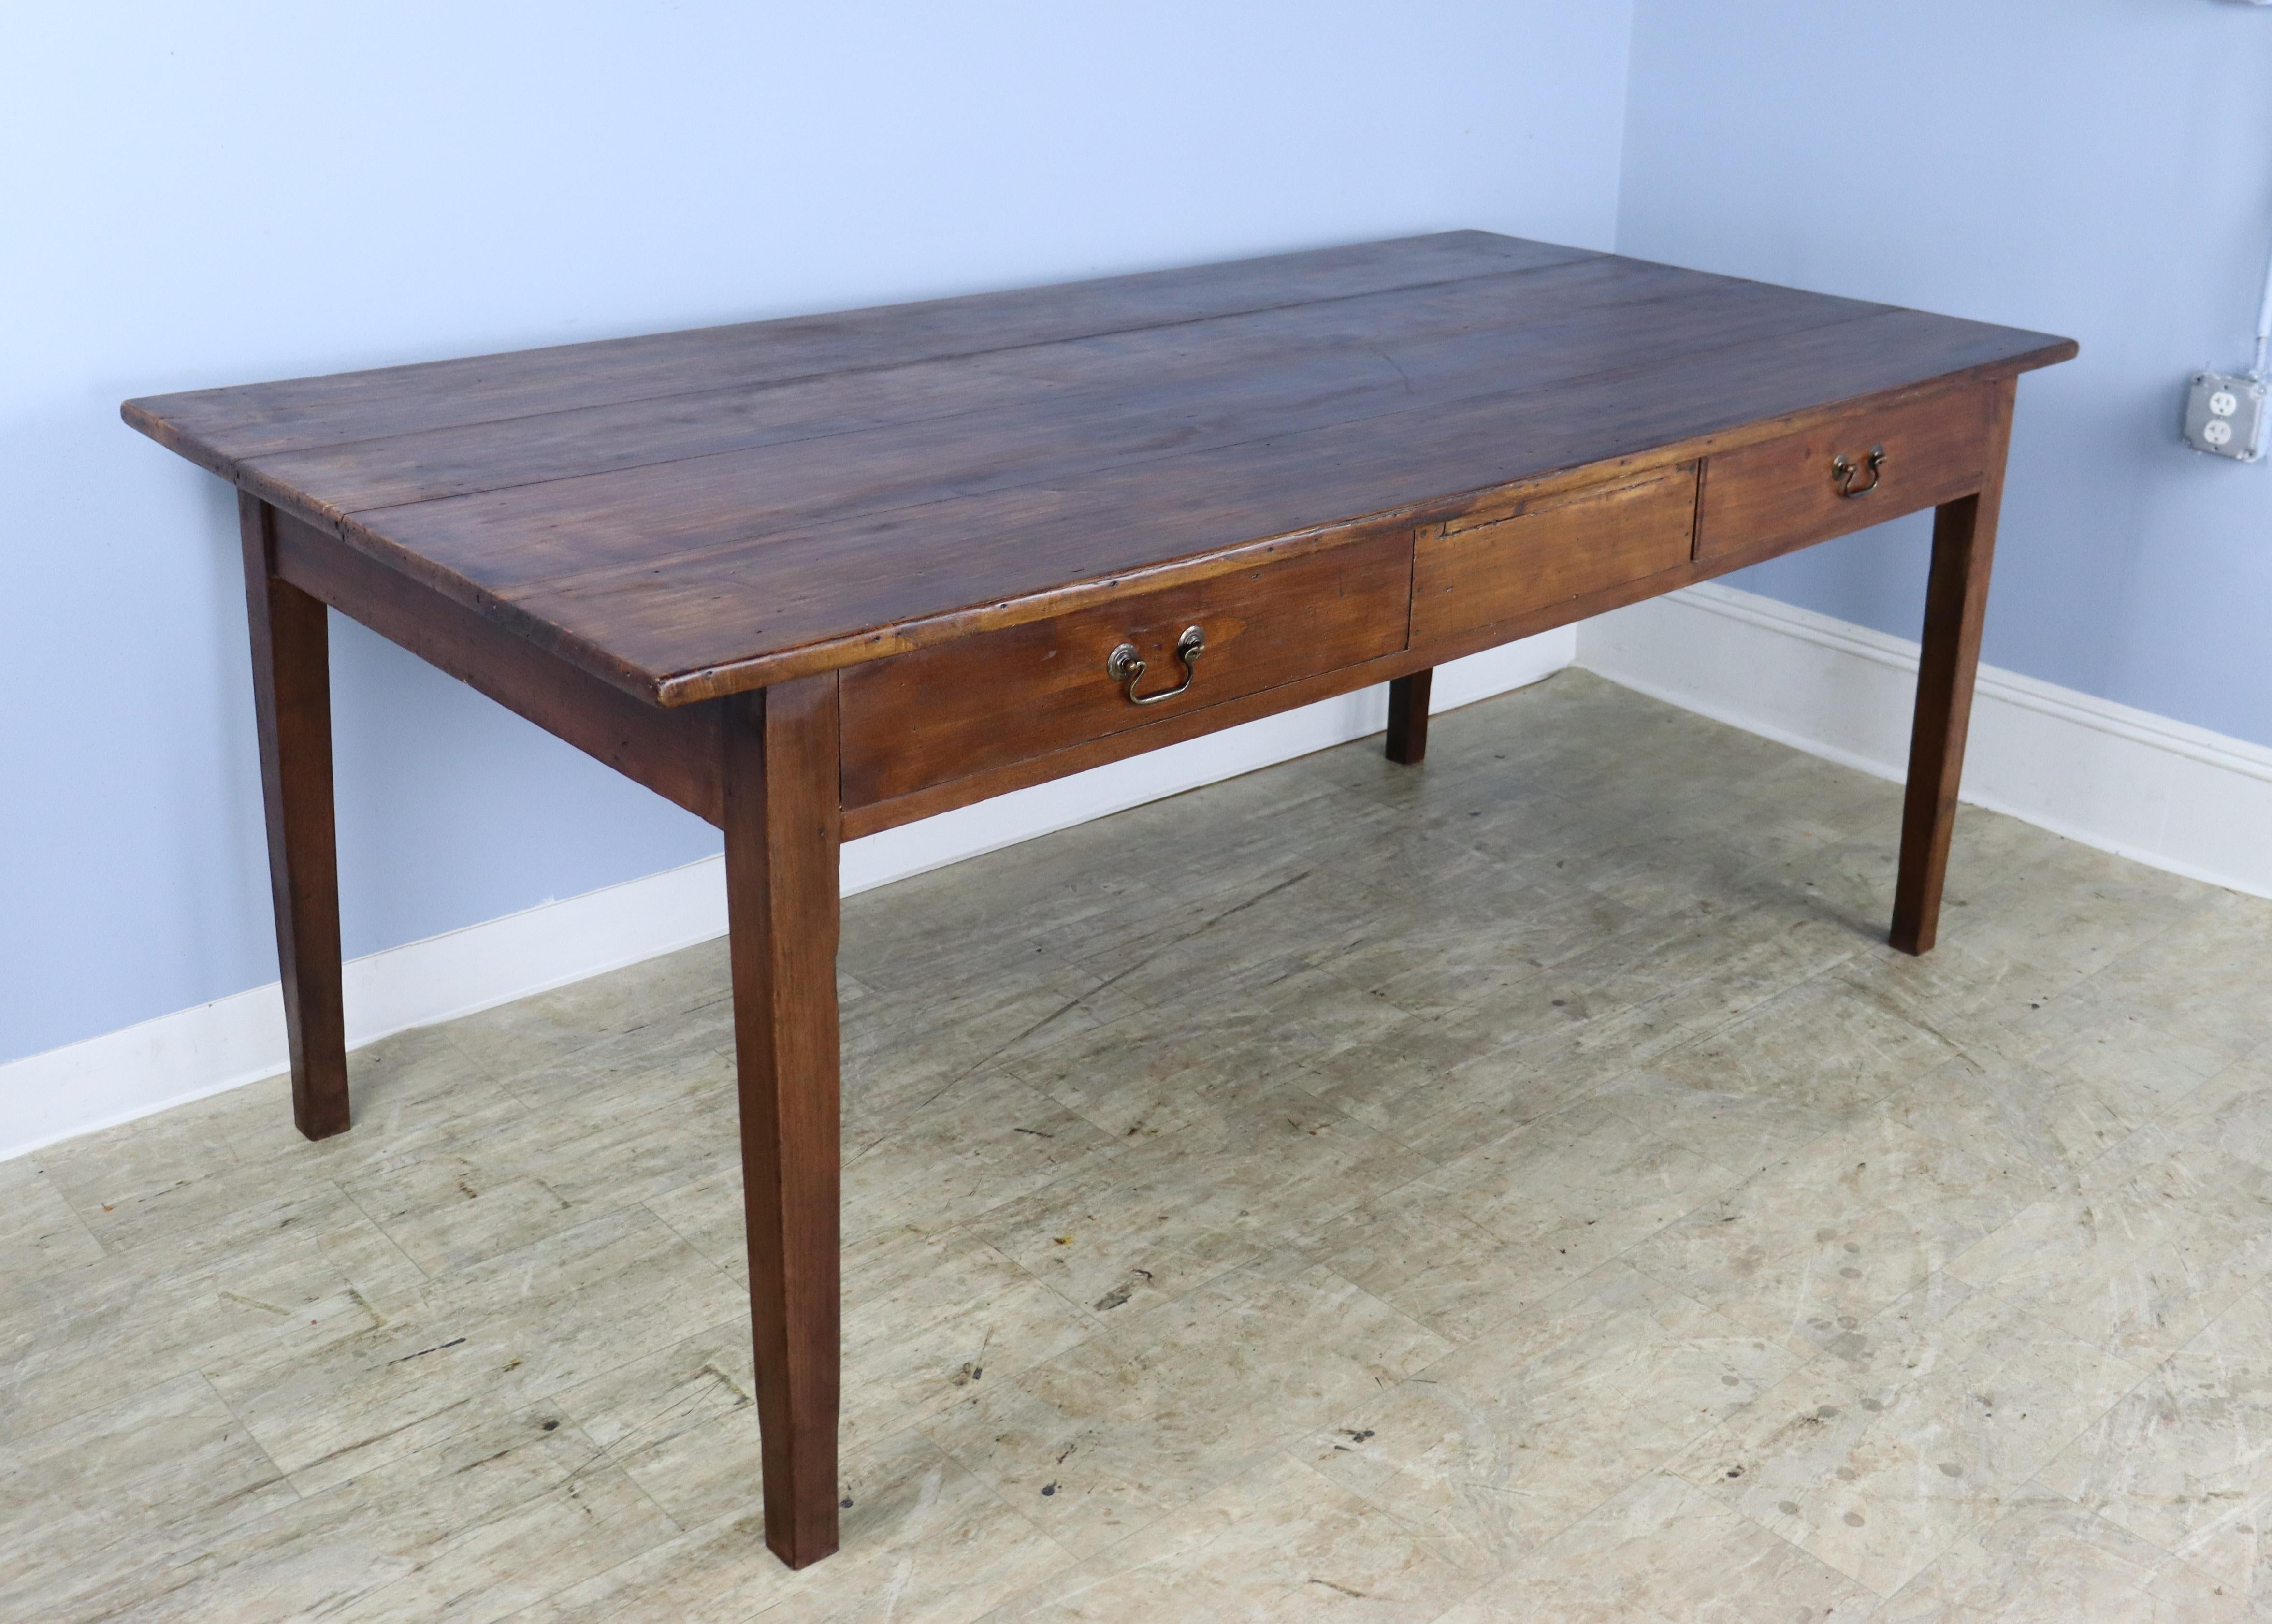 A small dining or farm table/desk in dark fruitwood with great depth, either for dining or for use as a partner's desk. Top has lovely grain and patina. 2 deep drawers on each side makes this a versatile choice. Classic tapered legs, nicely pegged